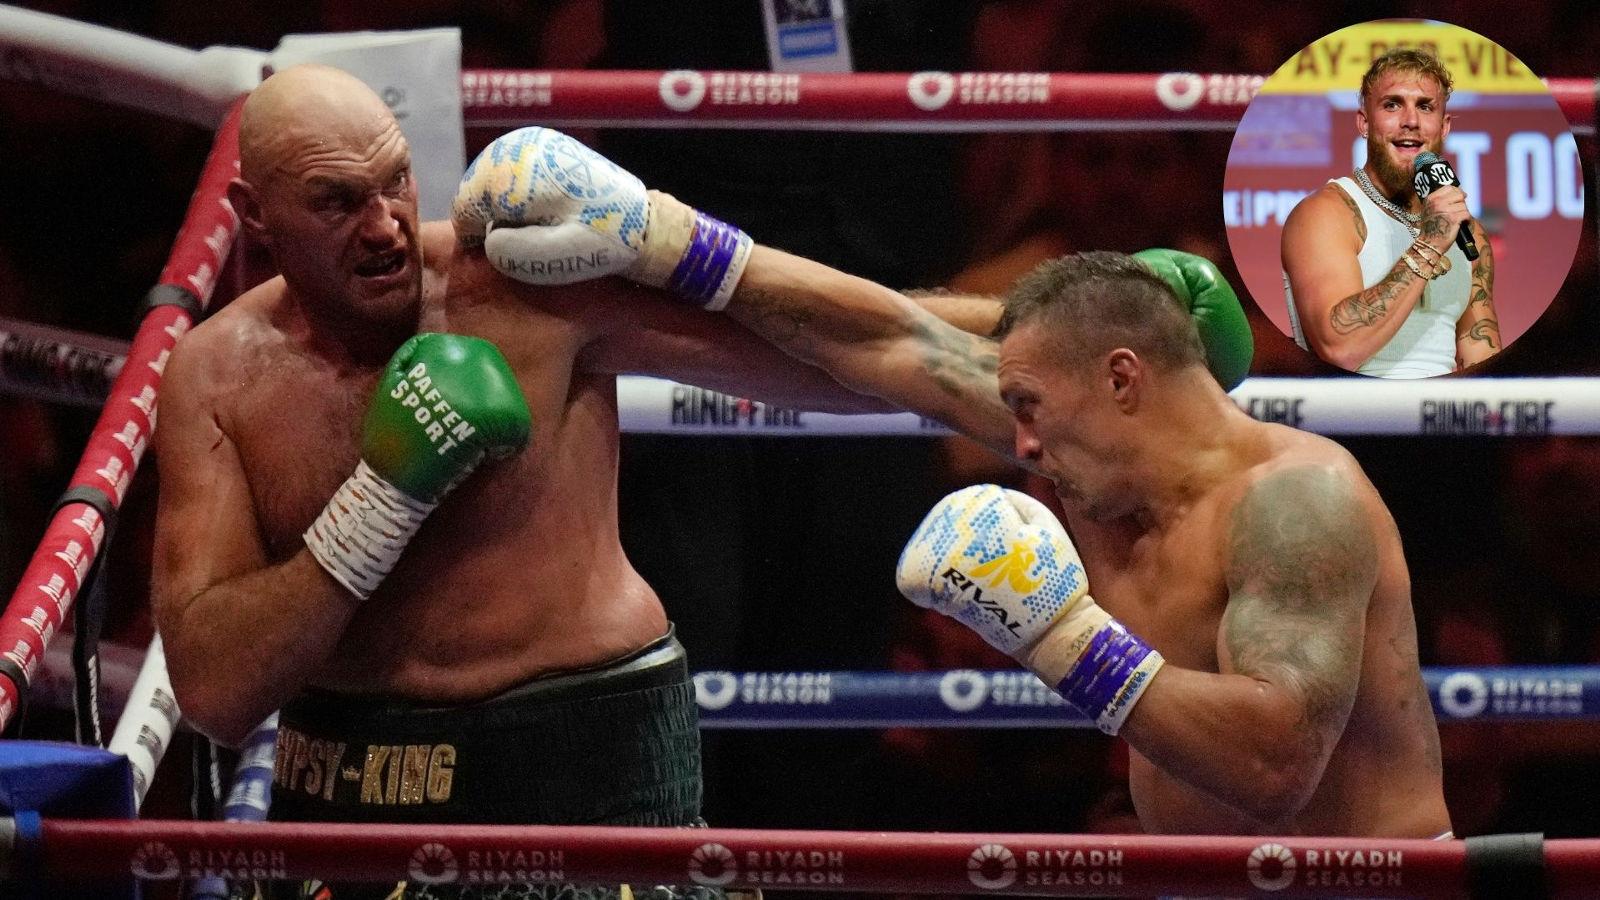 Tyson Fury fights Oleksandr Usyk with Jake Paul pictured inset in the top right of the image